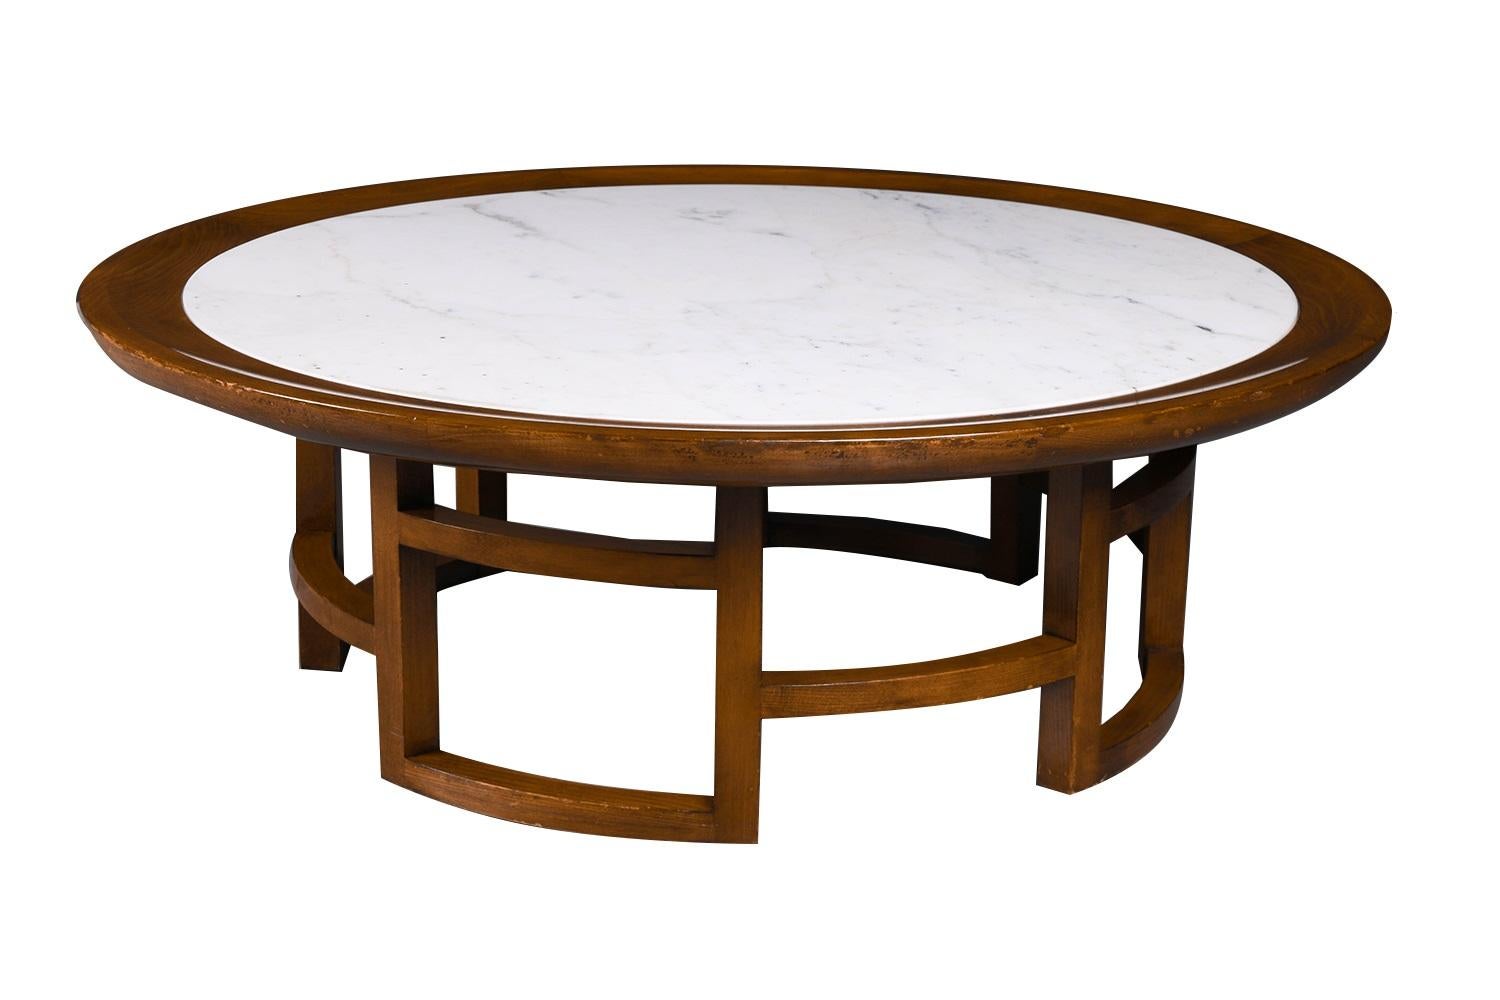 A stylish mid century round marble top coffee table in the manner of James Mont, by Warsaw Furniture Company circa 1950's. This vintage marble and wood table features original circular white Carrara marble top, inserted in a fluted rim supported by